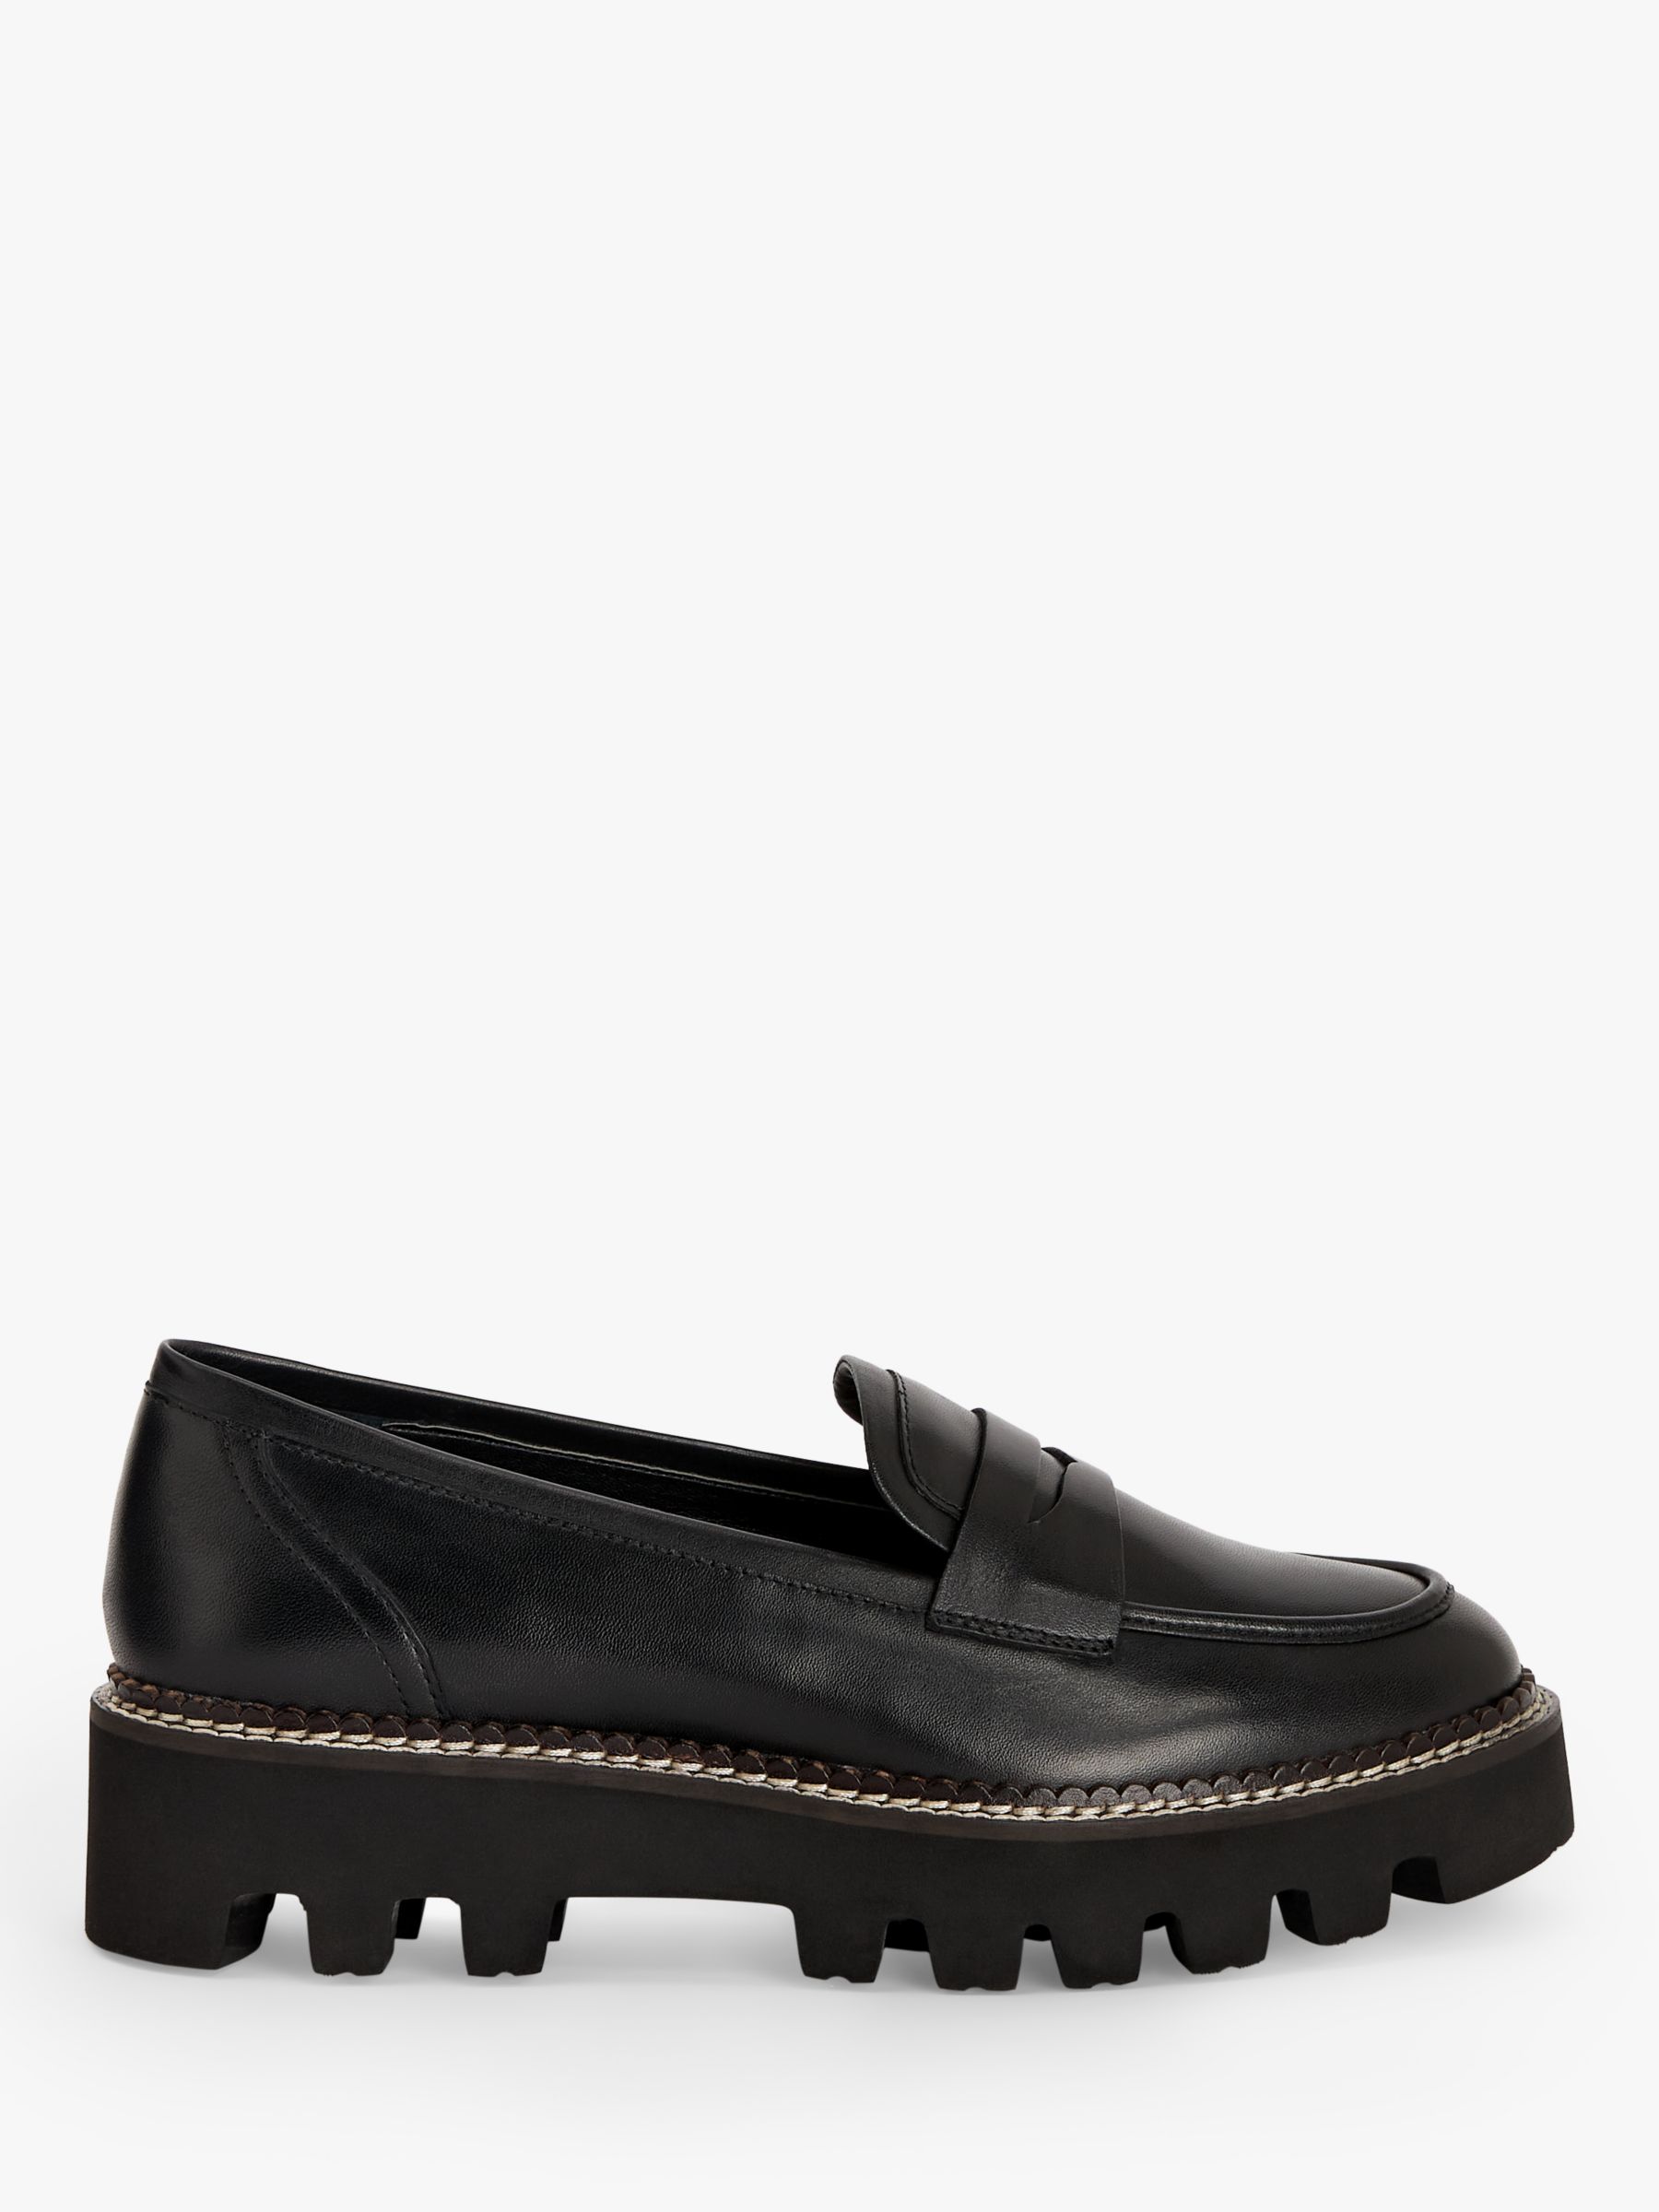 John Lewis ANYDAY Gryffin Leather Penny Loafers, Black, 6